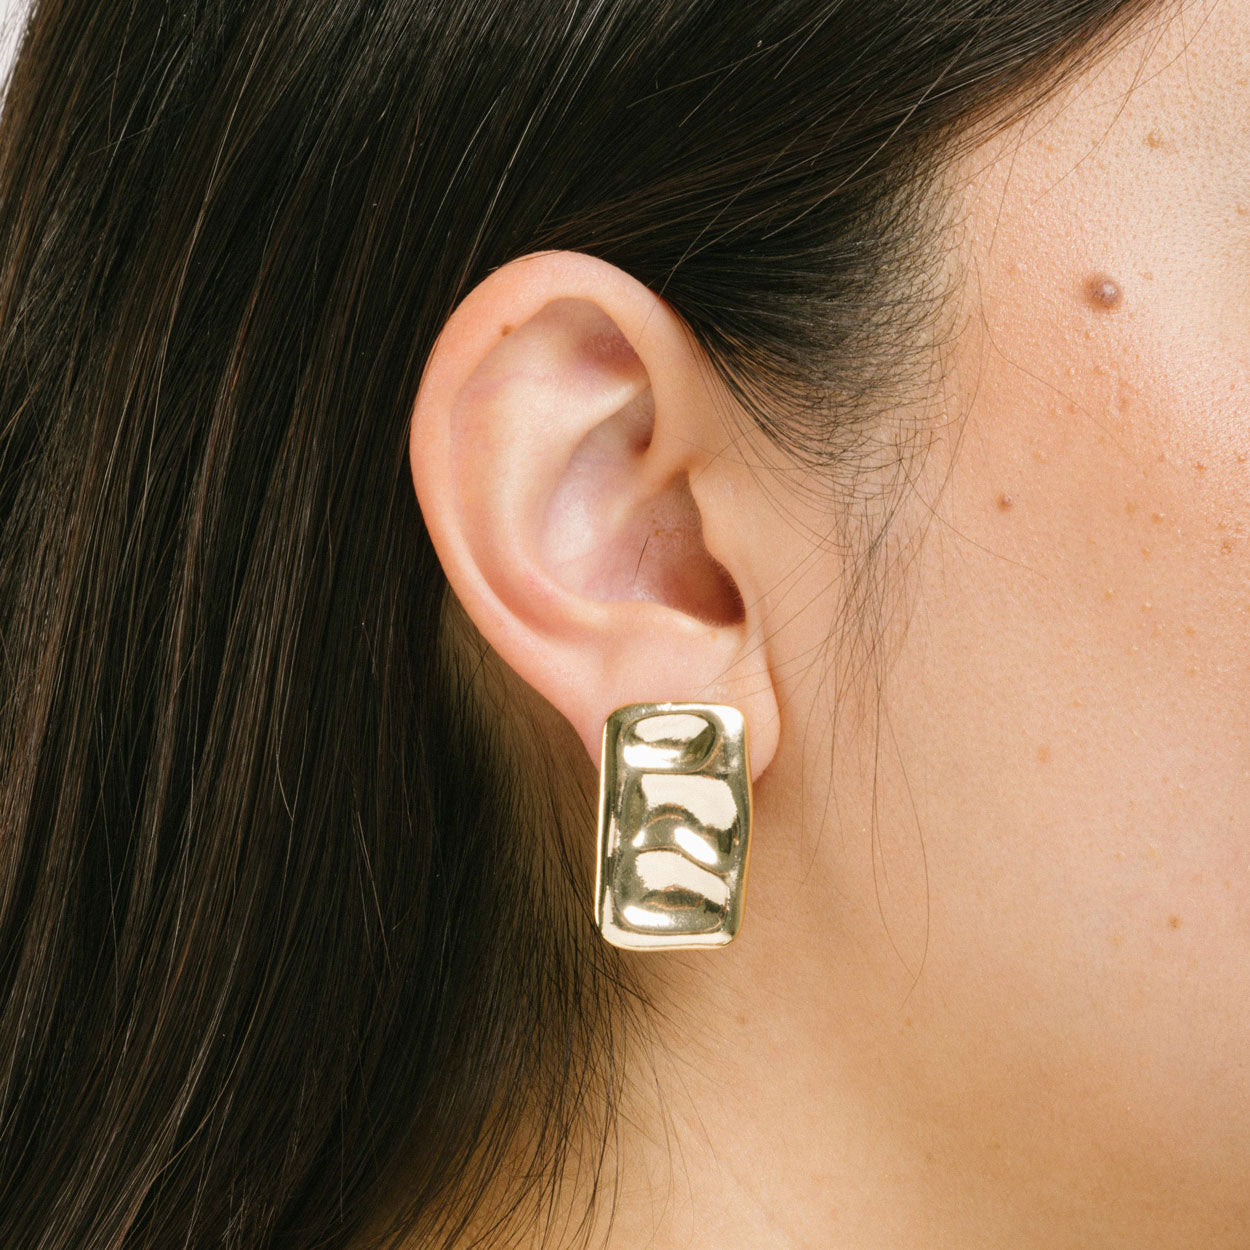 A model wearing the Nova Clip On Earrings in Gold feature a secure and comfortable padded clip-on design, suitable for all ear types. The earrings are crafted with Gold Tone Copper Alloy and offer an average comfortable wear duration of 8-12 hours. The design of the earring does not allow for adjustment, and each item sold is a single pair.